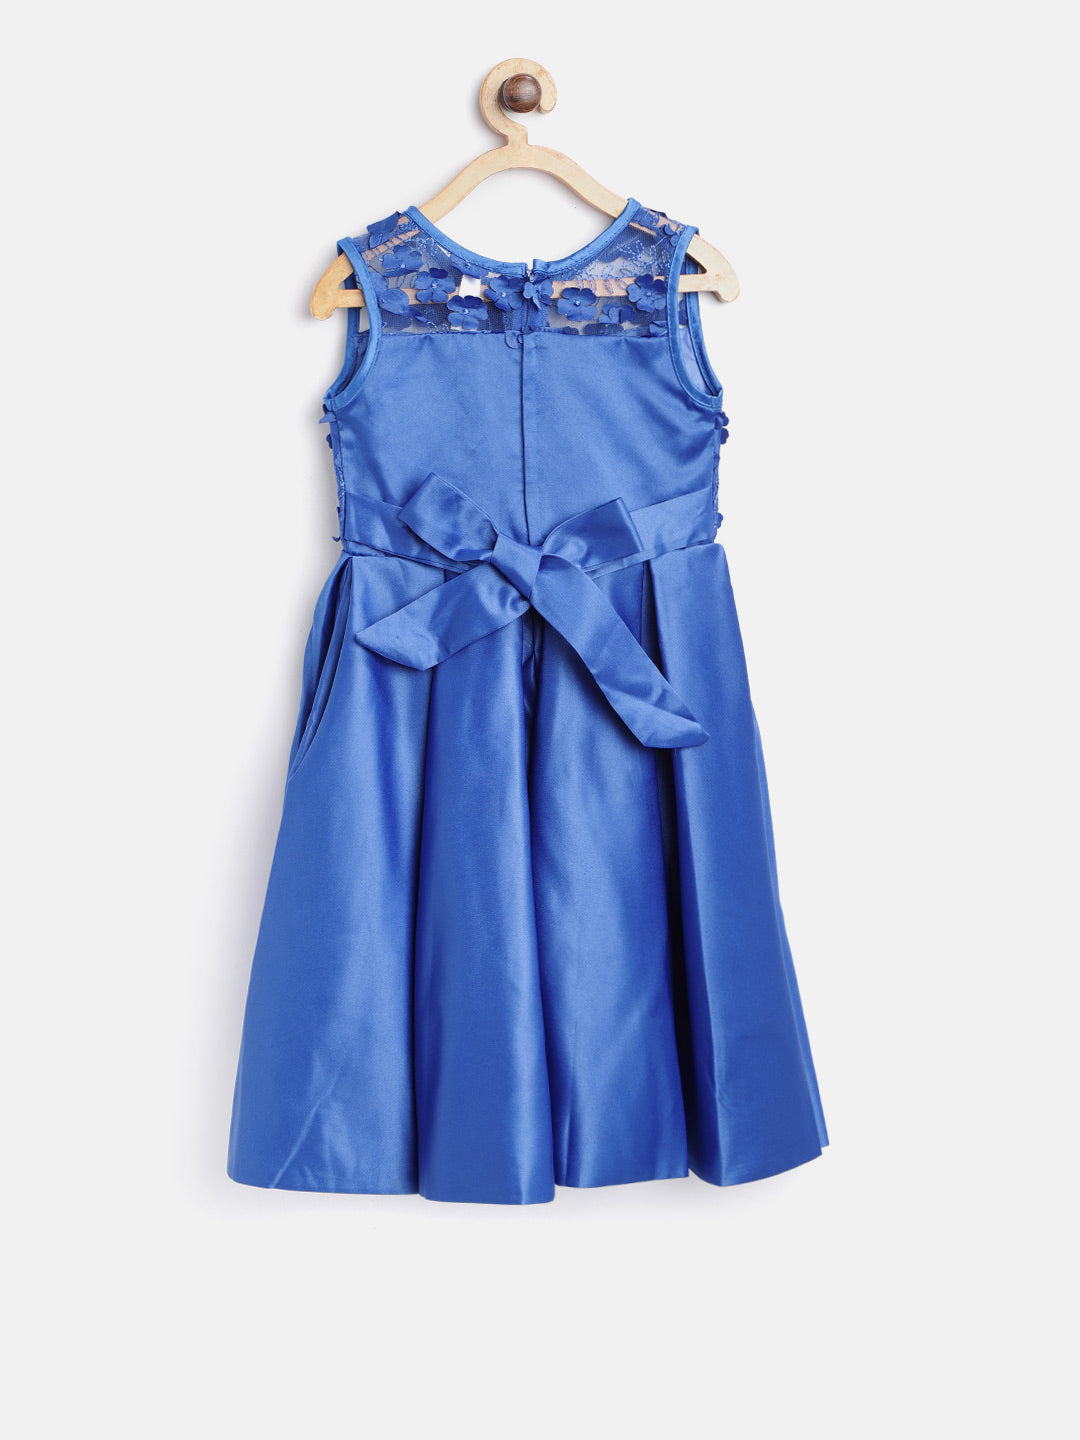 Girls Blue Pearls and embroidered Party Dress